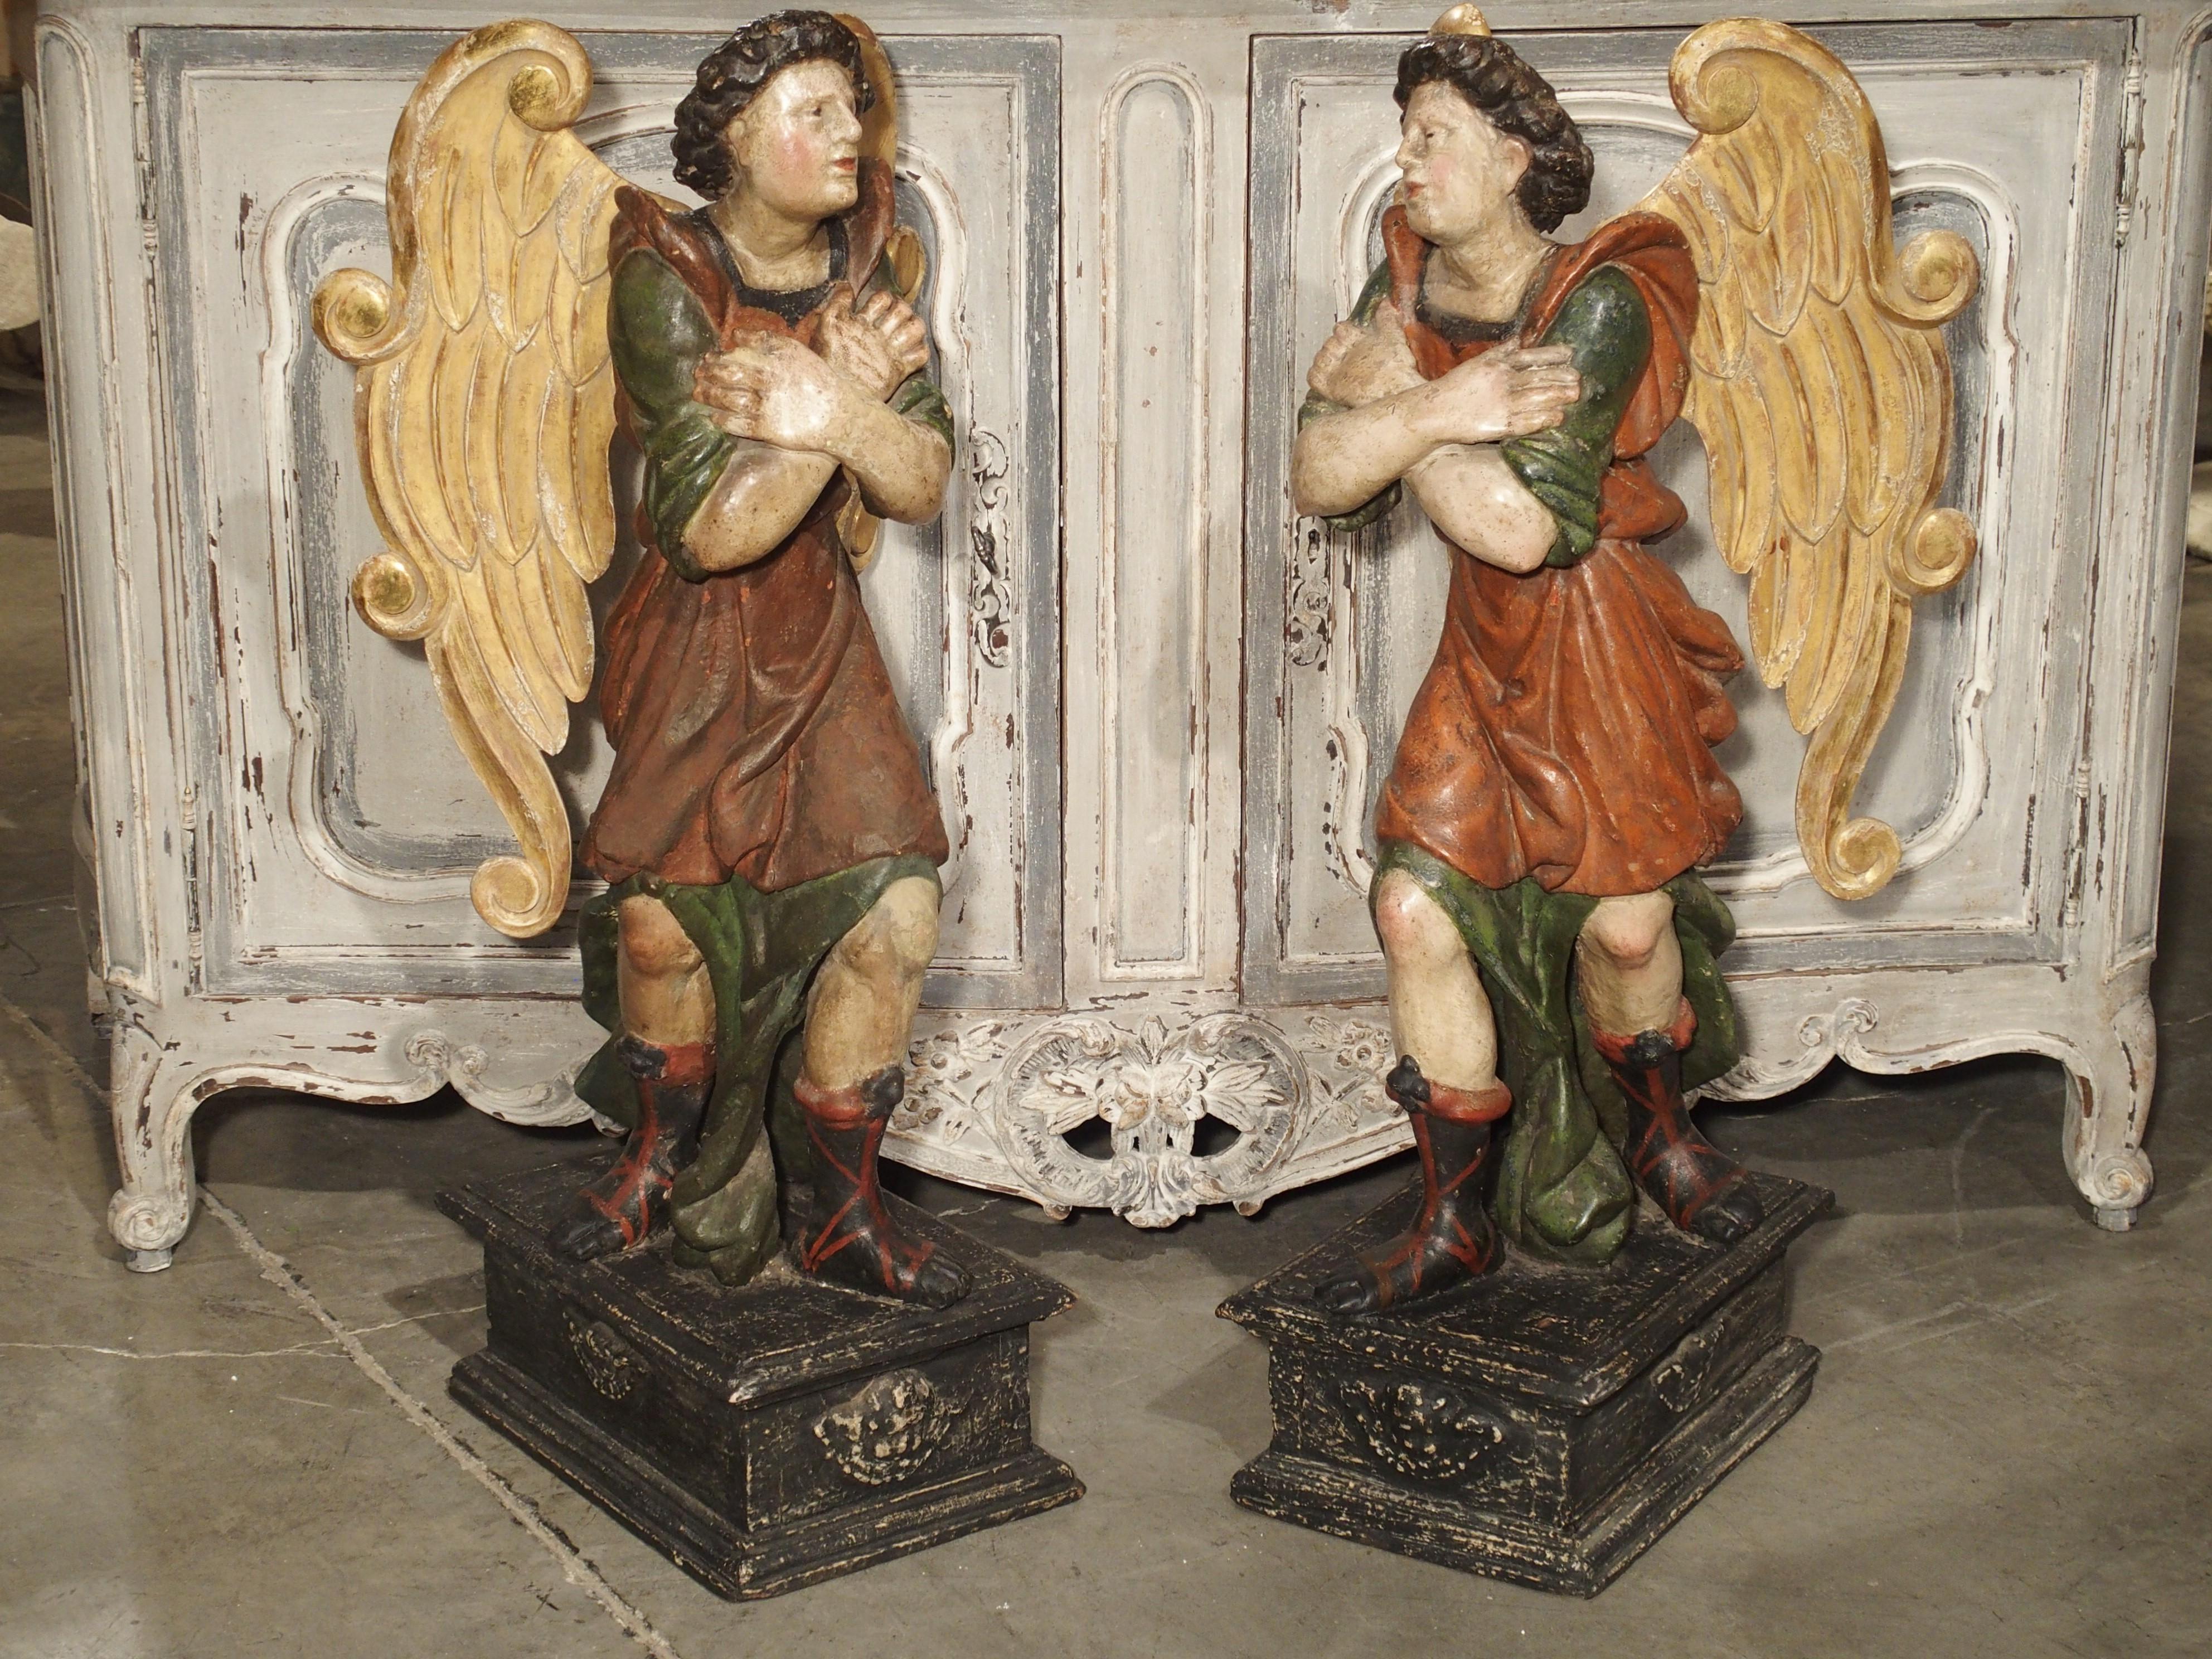 This wonderful pair of polychromed angels on bases are of Italian origin and date to the 17th century. They stand close to 40 inches tall, with their heads up and to the side, and crossed arms over their chest. As a true pair, they stand next to